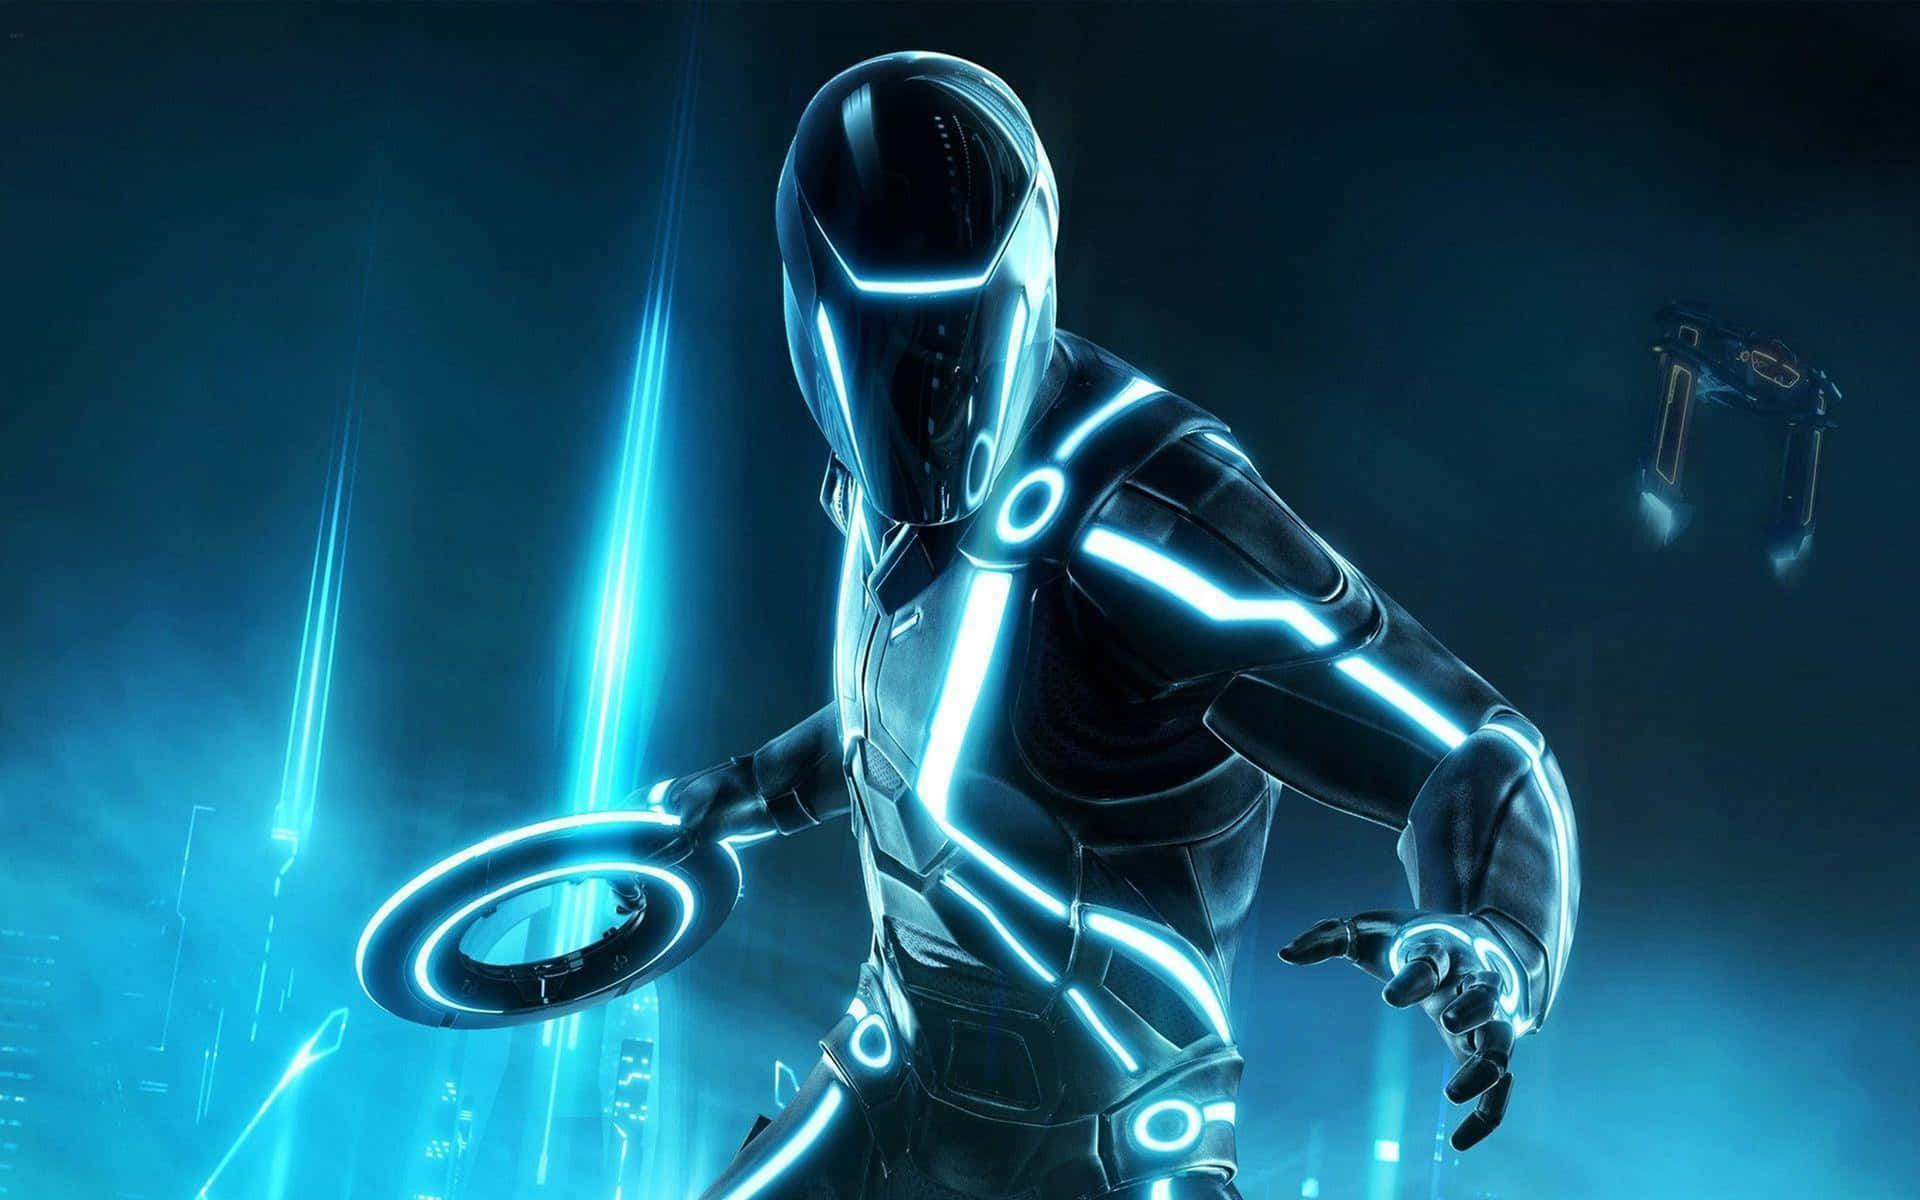 Tron Light Suit And Identity Disc 4K Wallpaper